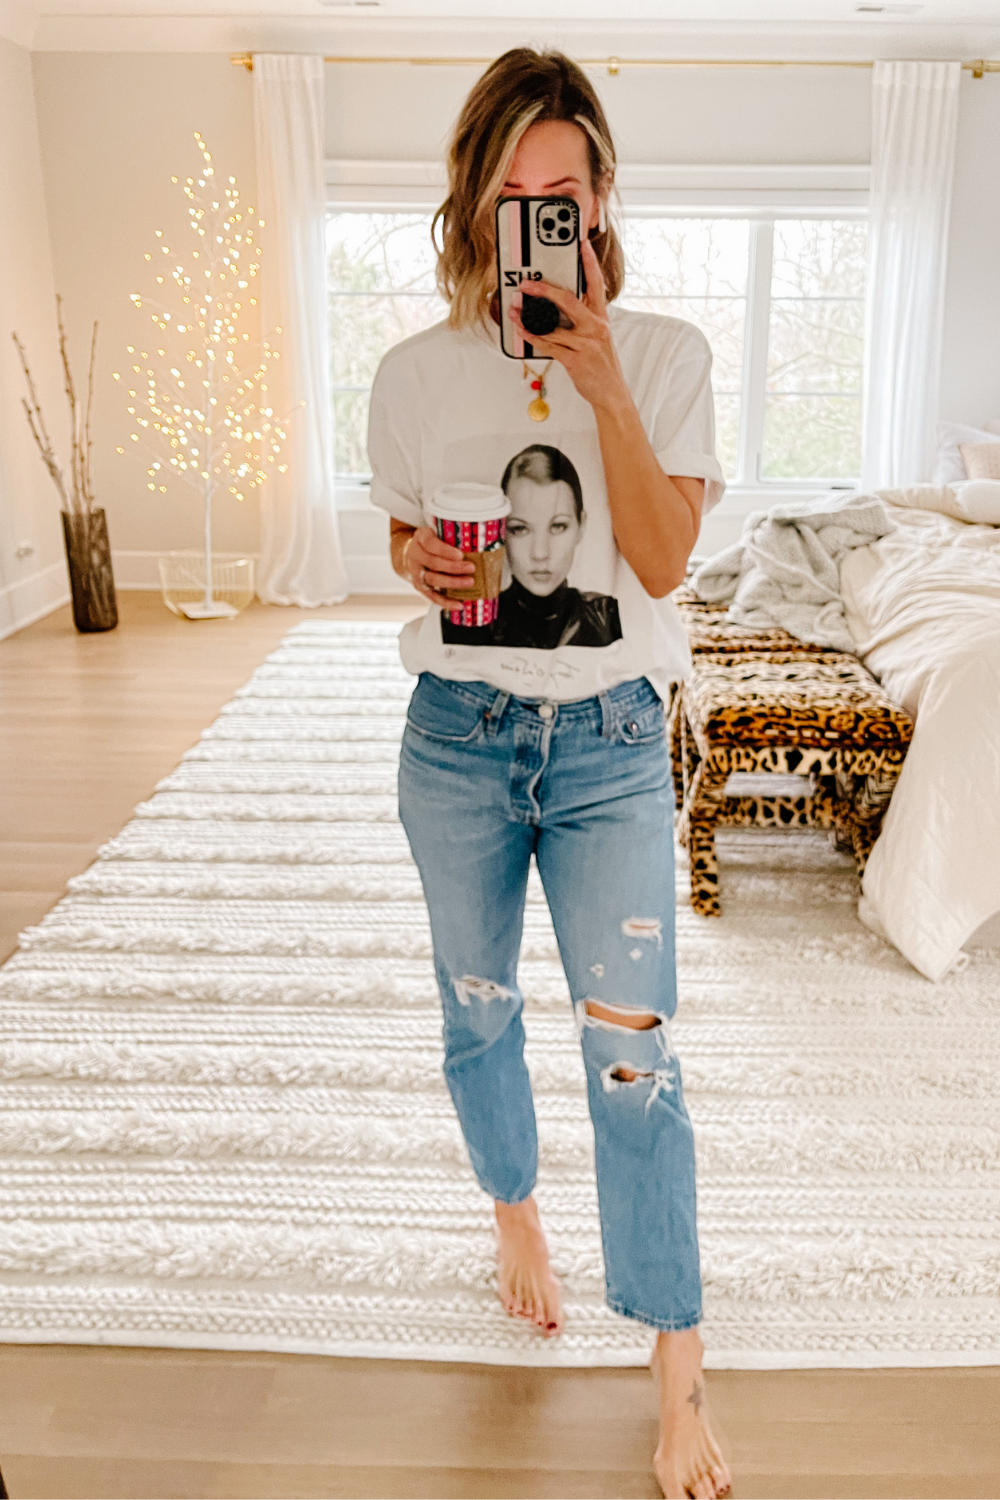 Suzanne wearing a graphic tee and denim